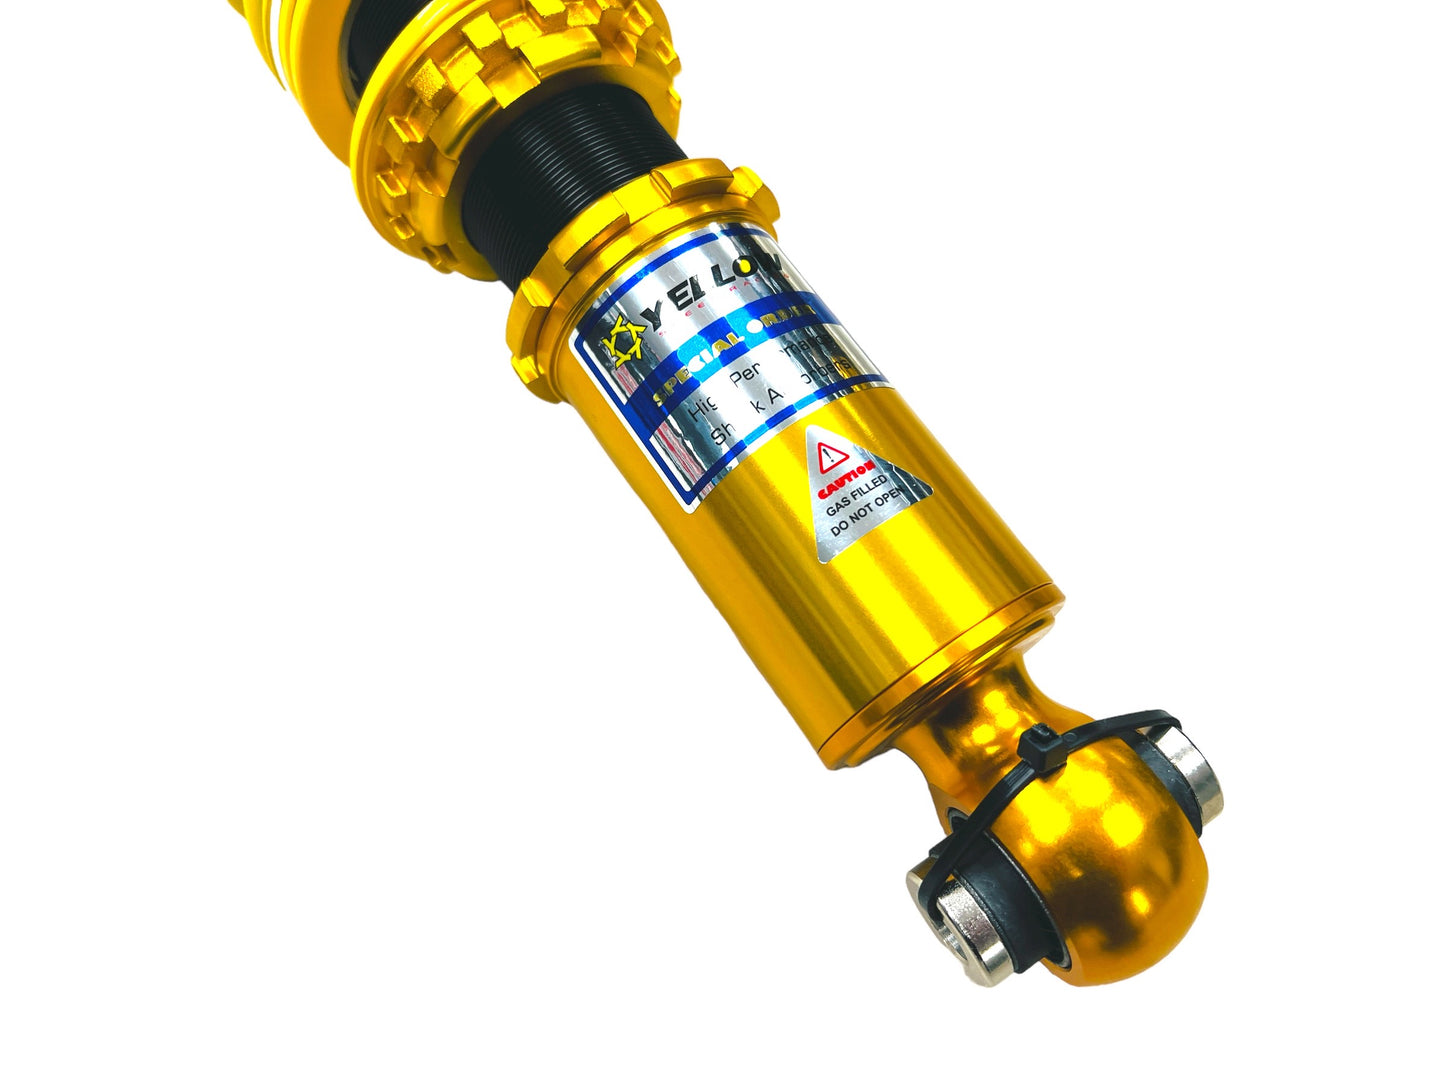 Dynamic Pro Gravel Rally Coilovers - Scion FR-S 2013-2016 (ZN6)